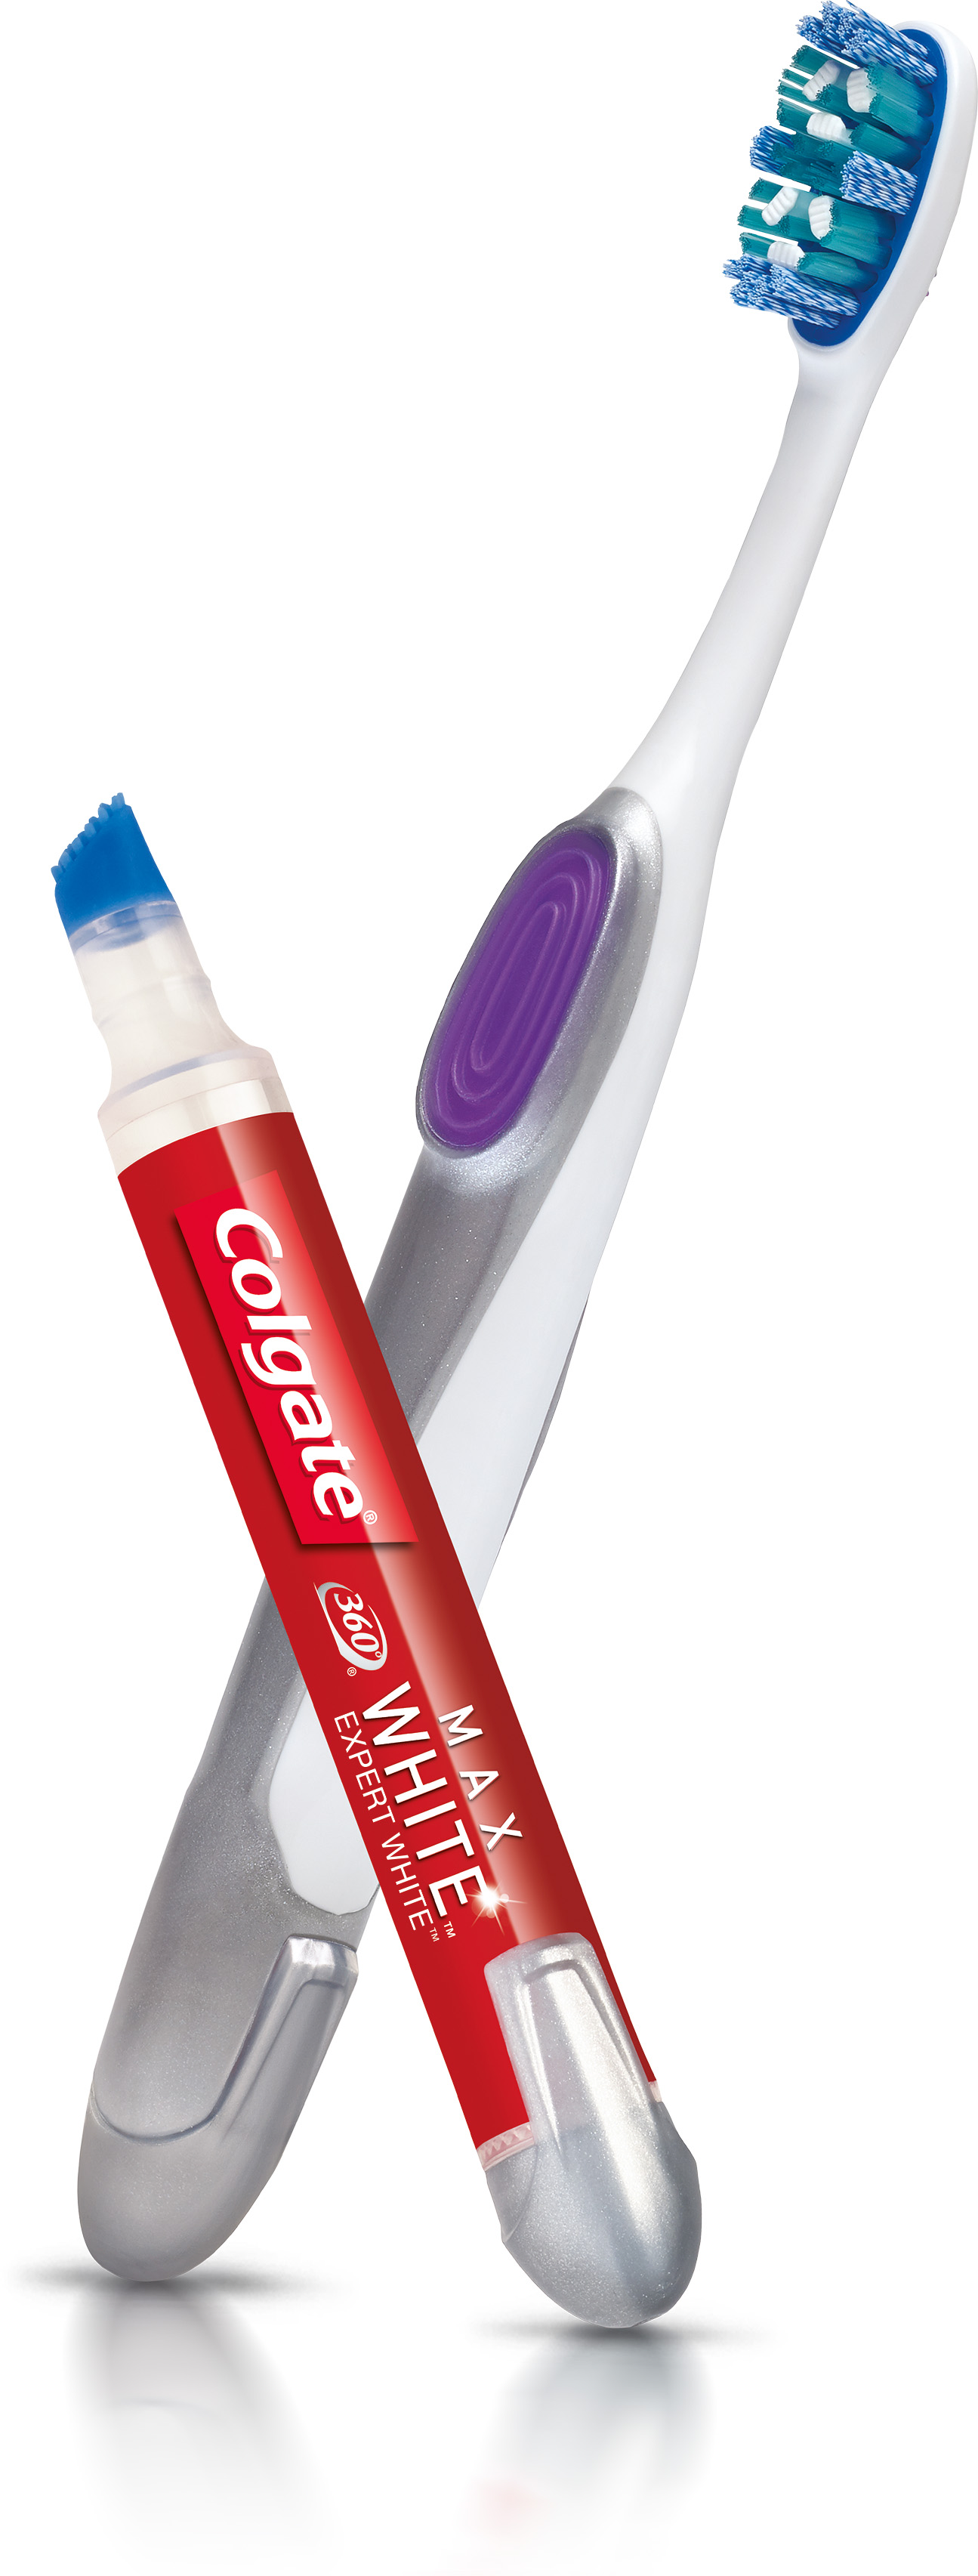 P&G attacks Colgate advert over toothpaste whitening claims